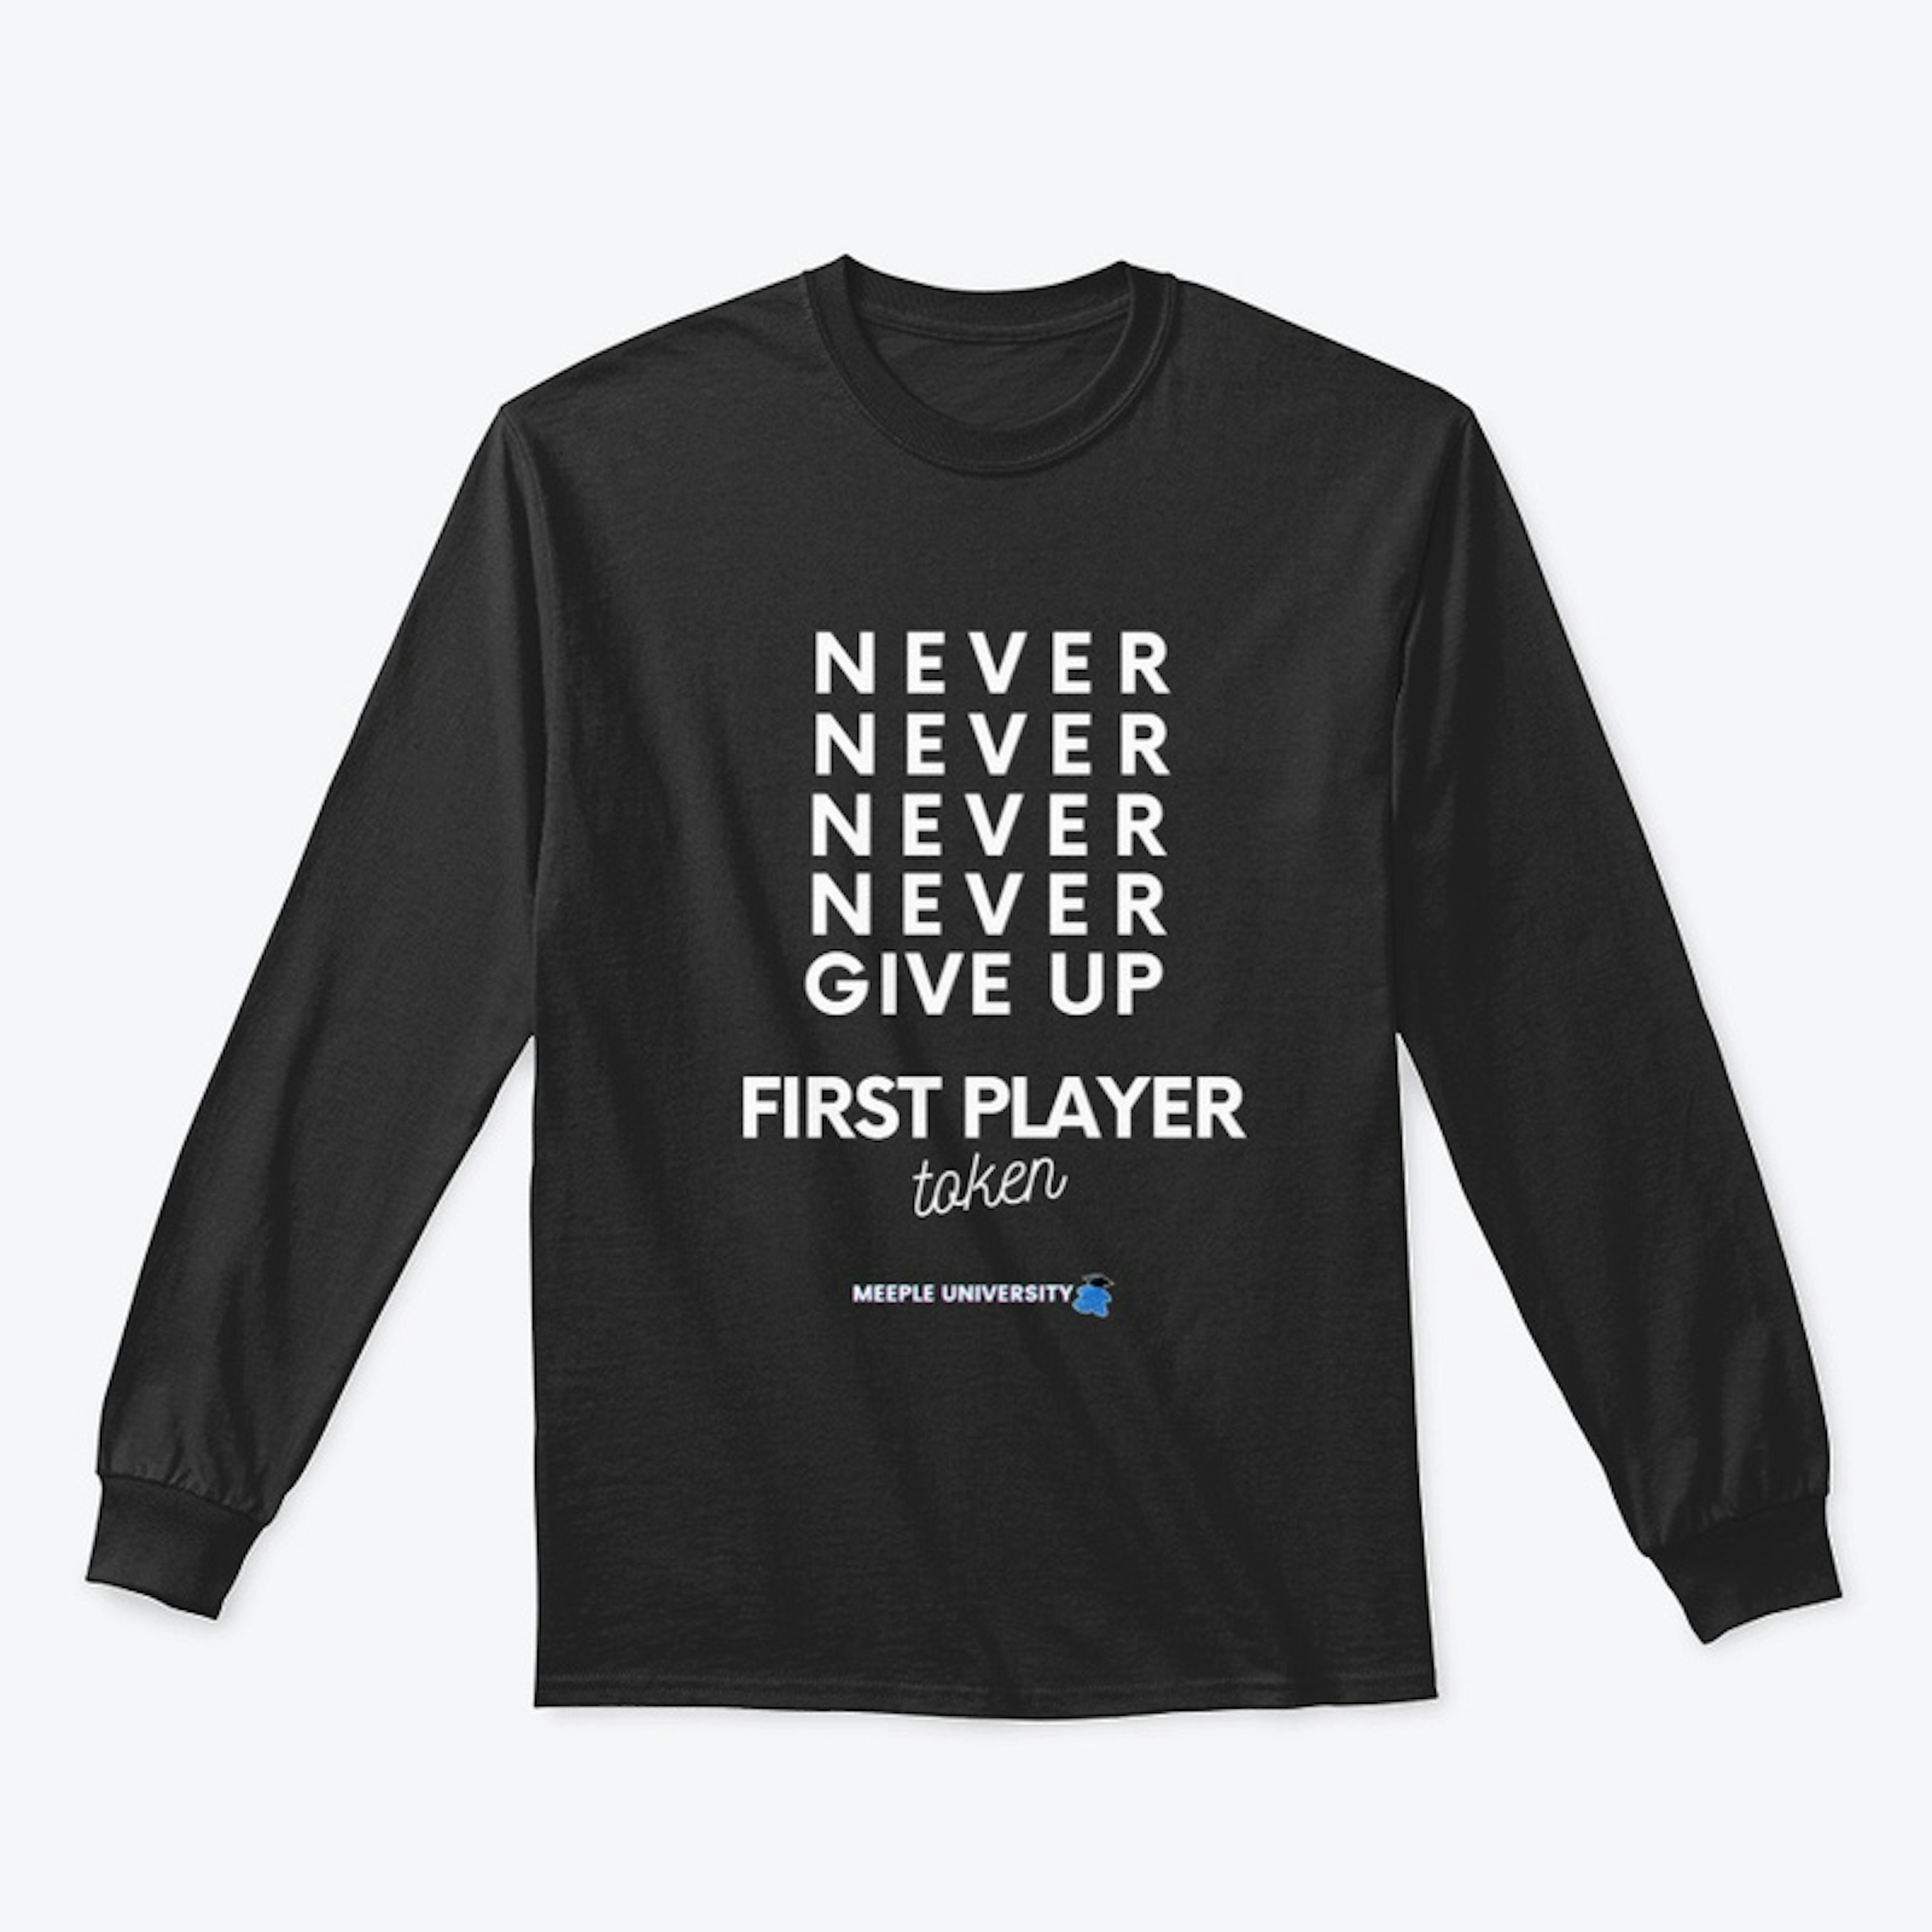 Always be the 1st player...